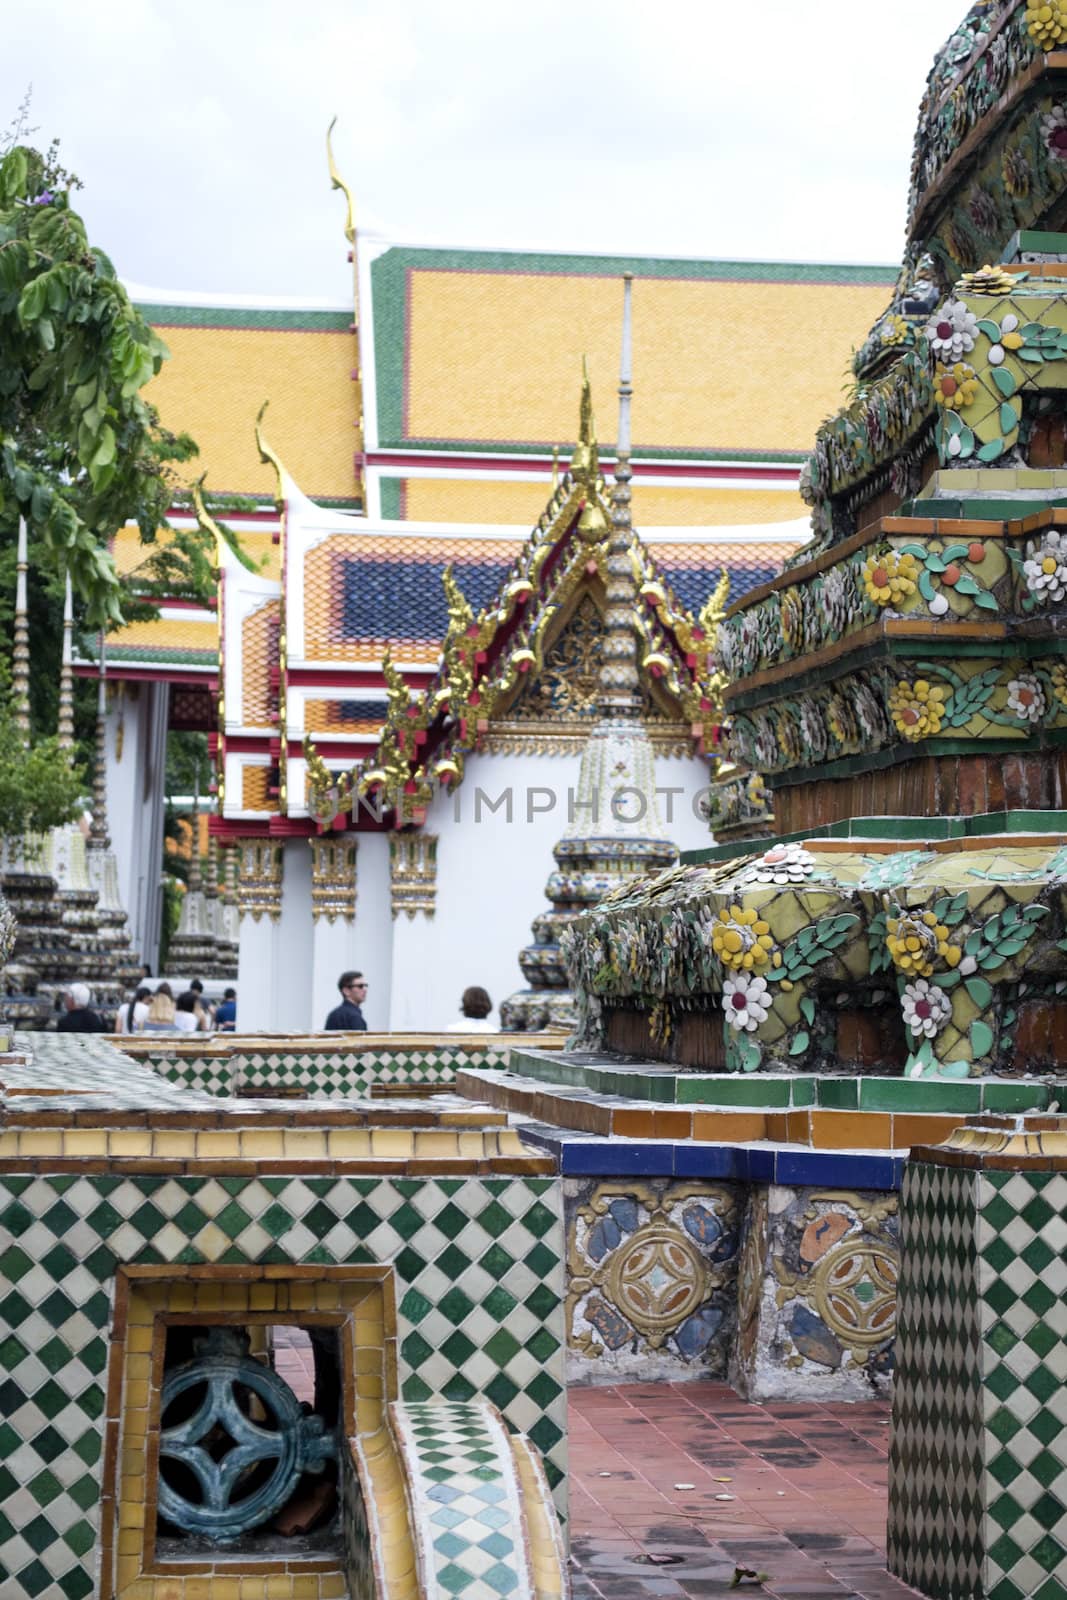 View of an ornate traditional Thai temple in Bangkok